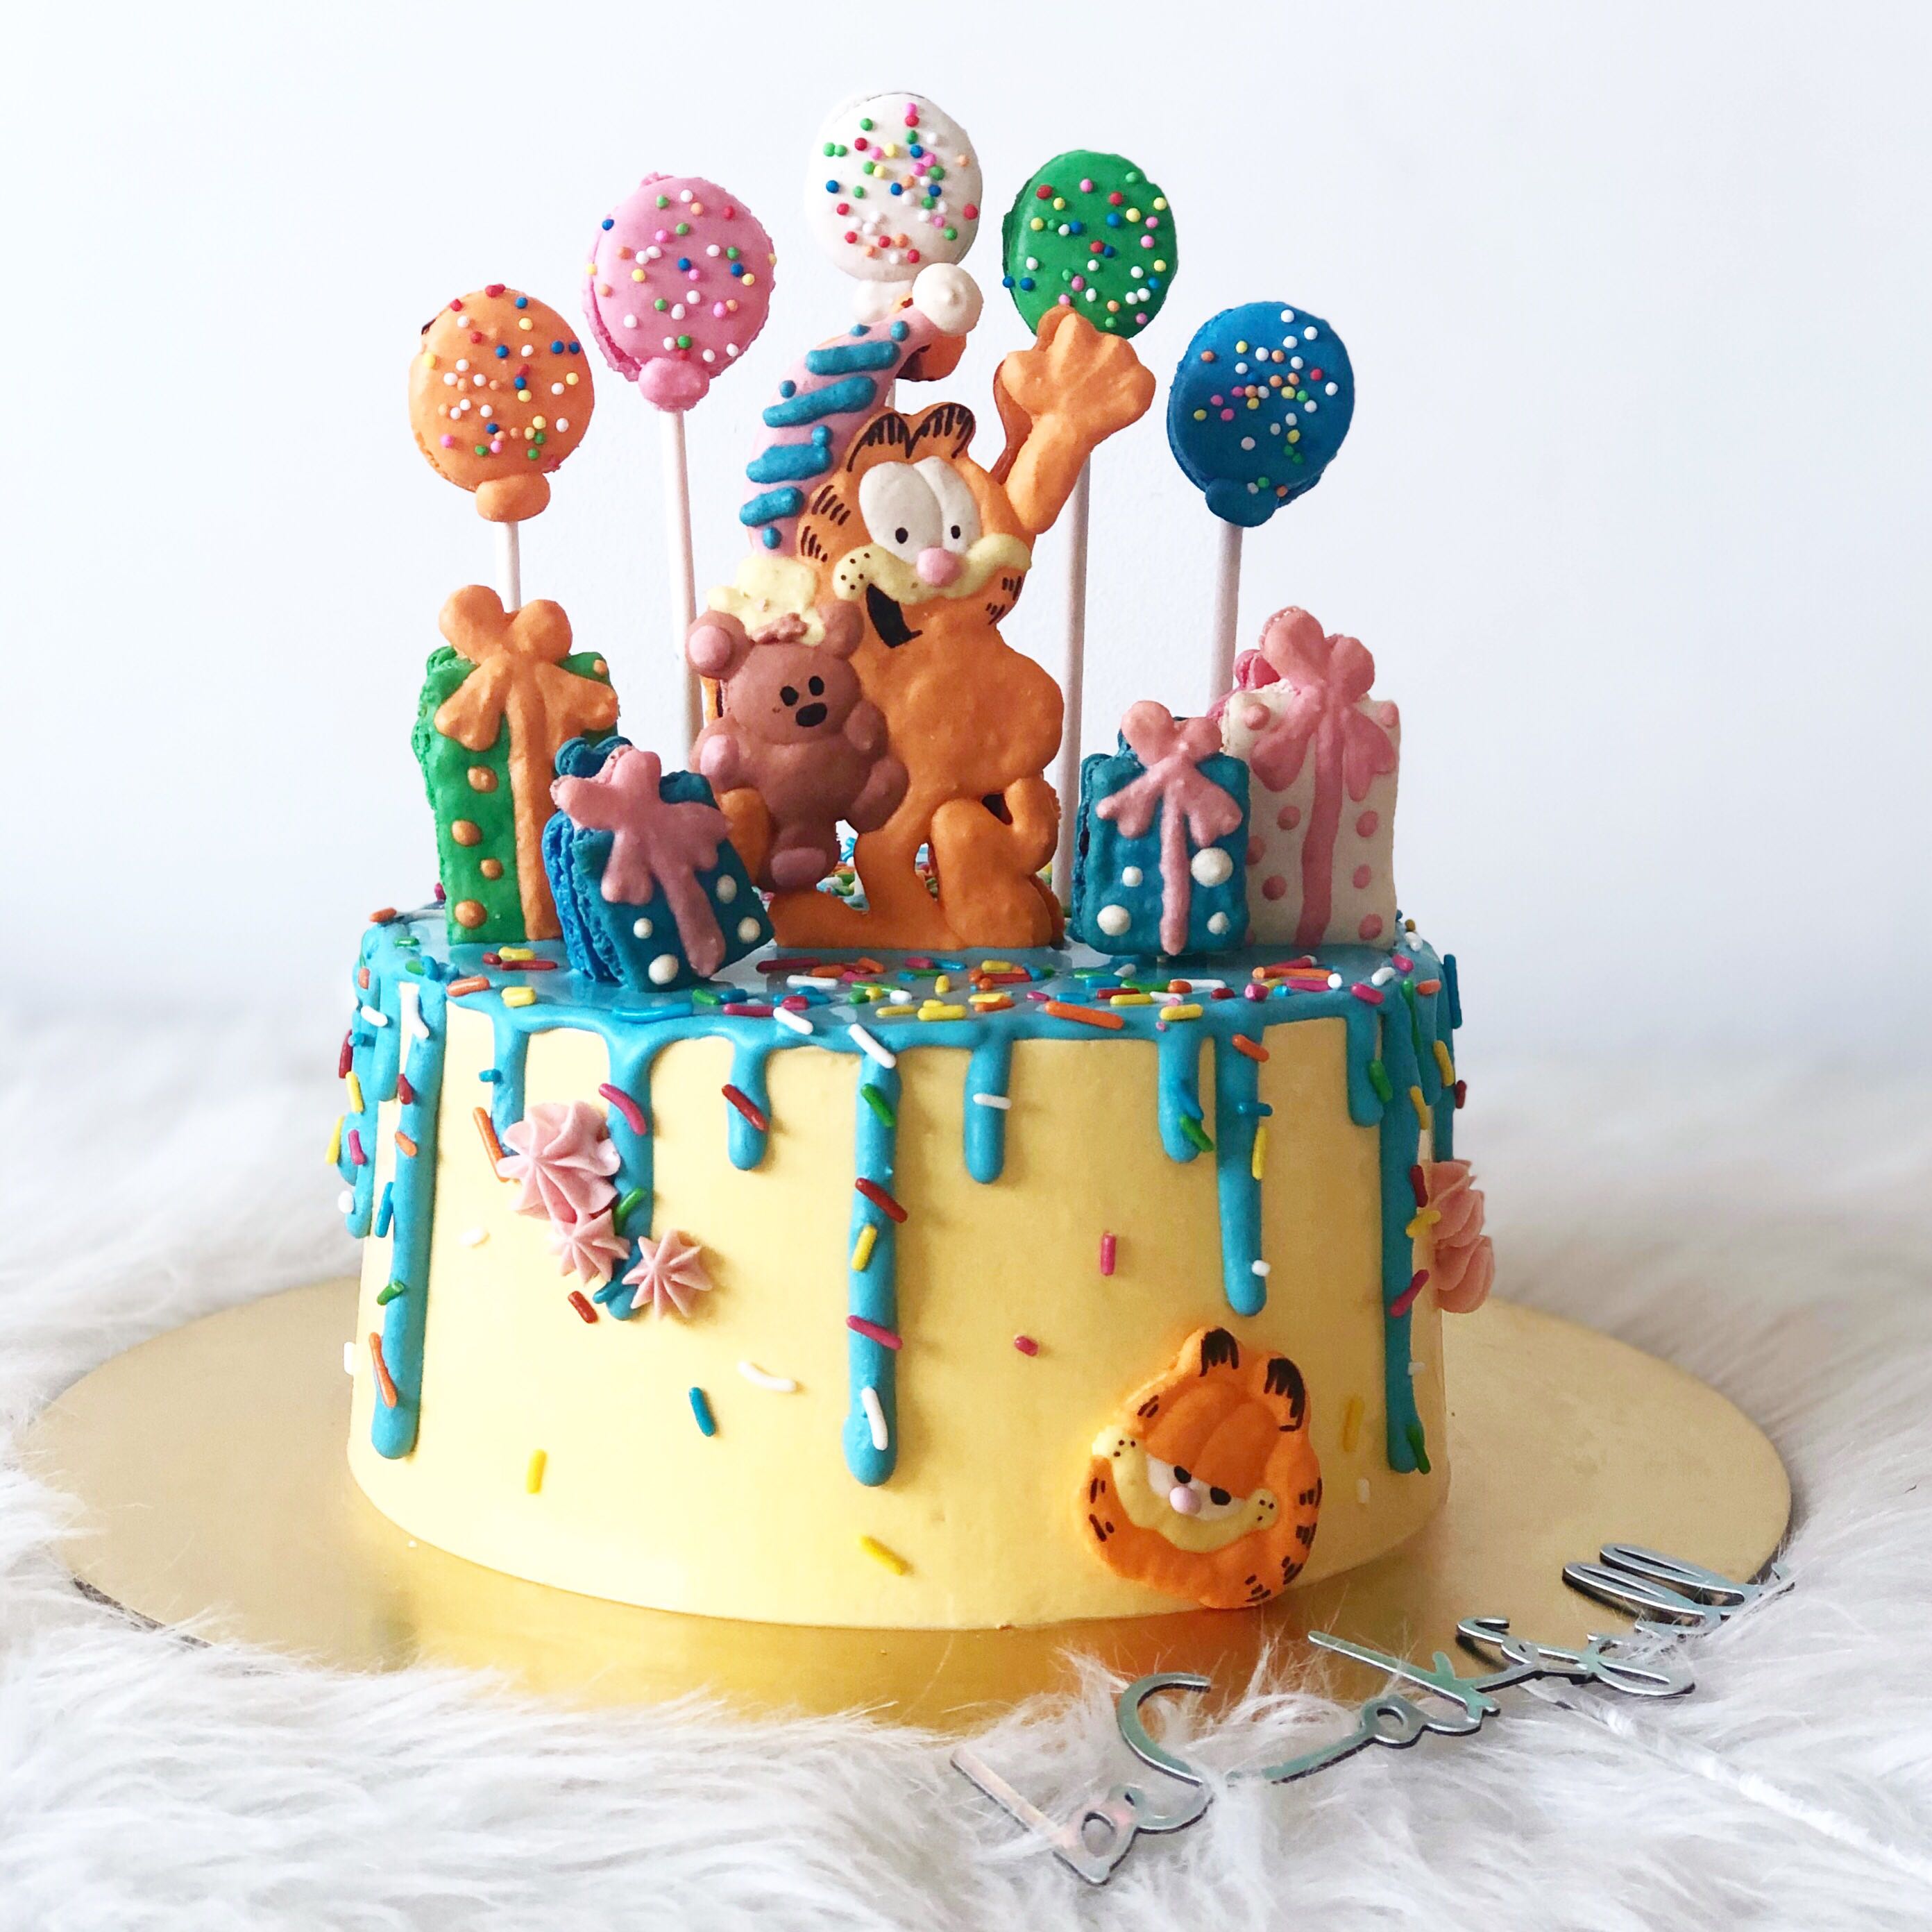 KREA - a birthday cake decorated to look like garfield the cat